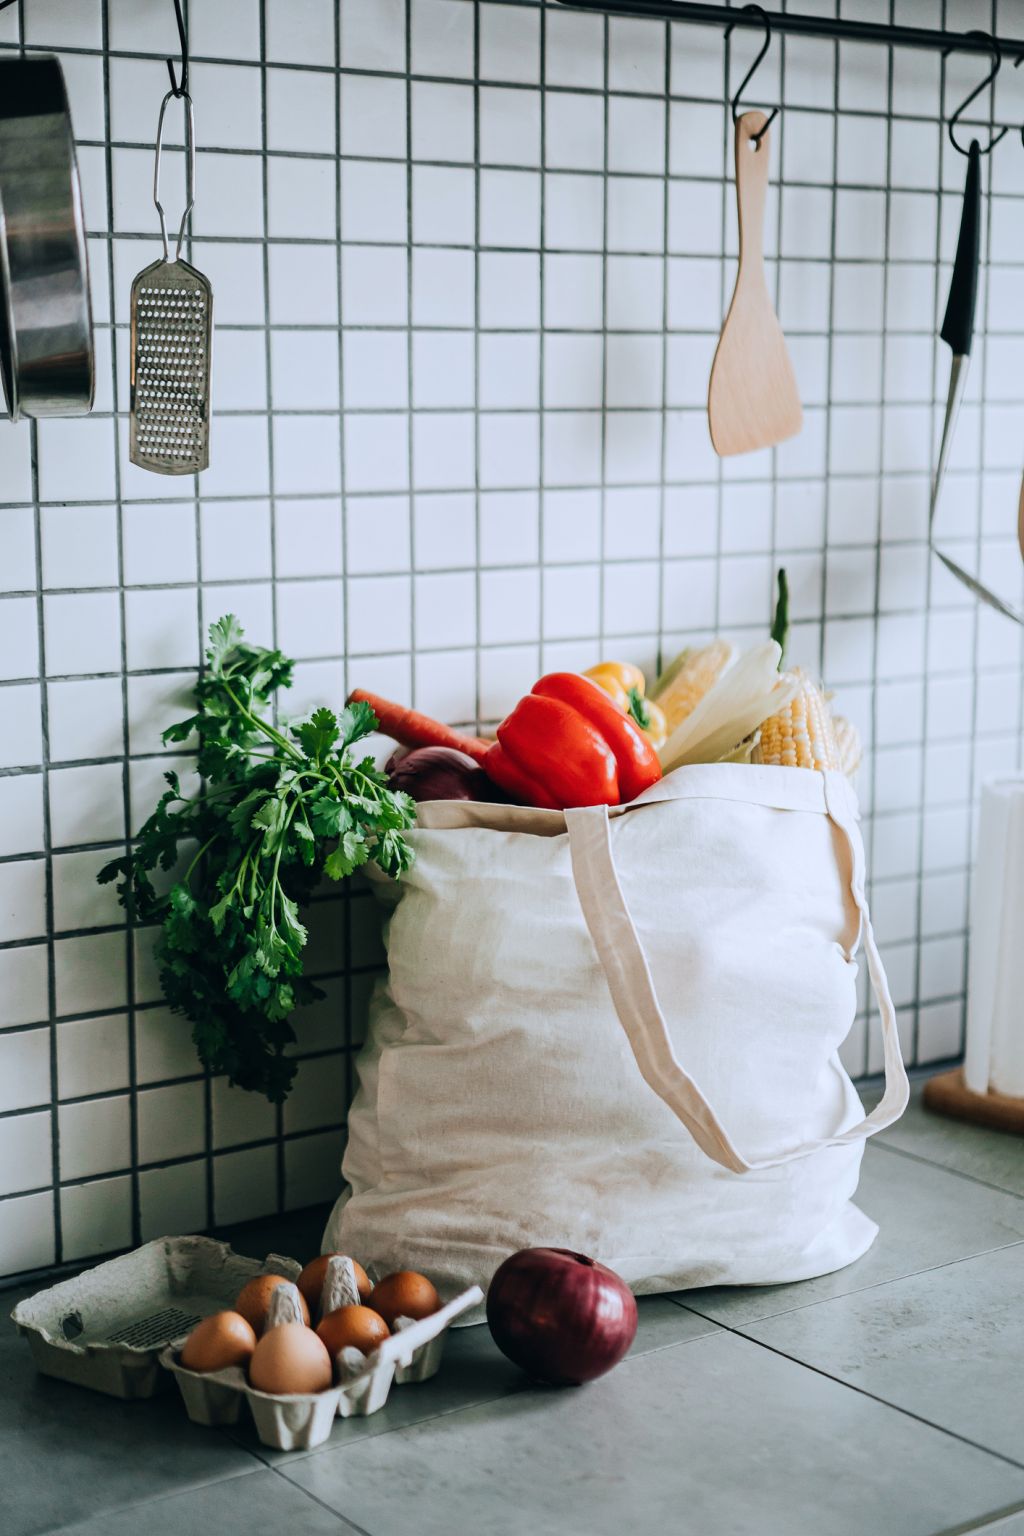 A reusable bag full of colourful and fresh organic vegetables and groceries on the kitchen counter. Zero waste shopping and sustainable lifestyle concept